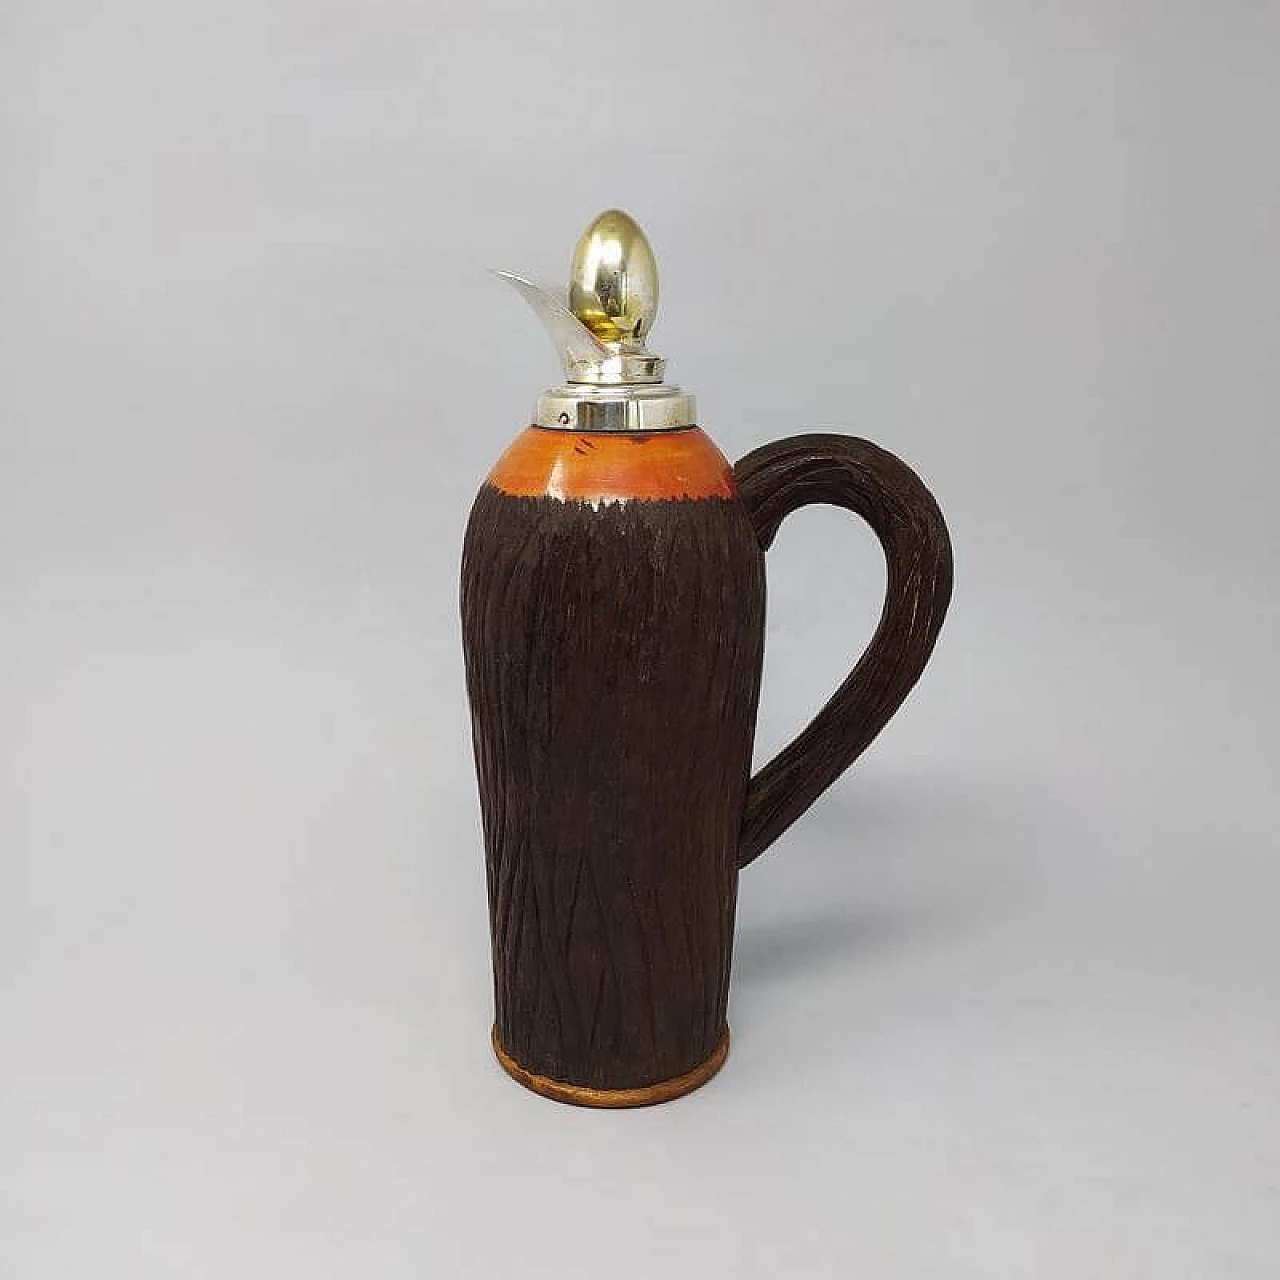 1950s Stunning Aldo Tura Pitcher in Brass and Wood, Made in Italy 1183879